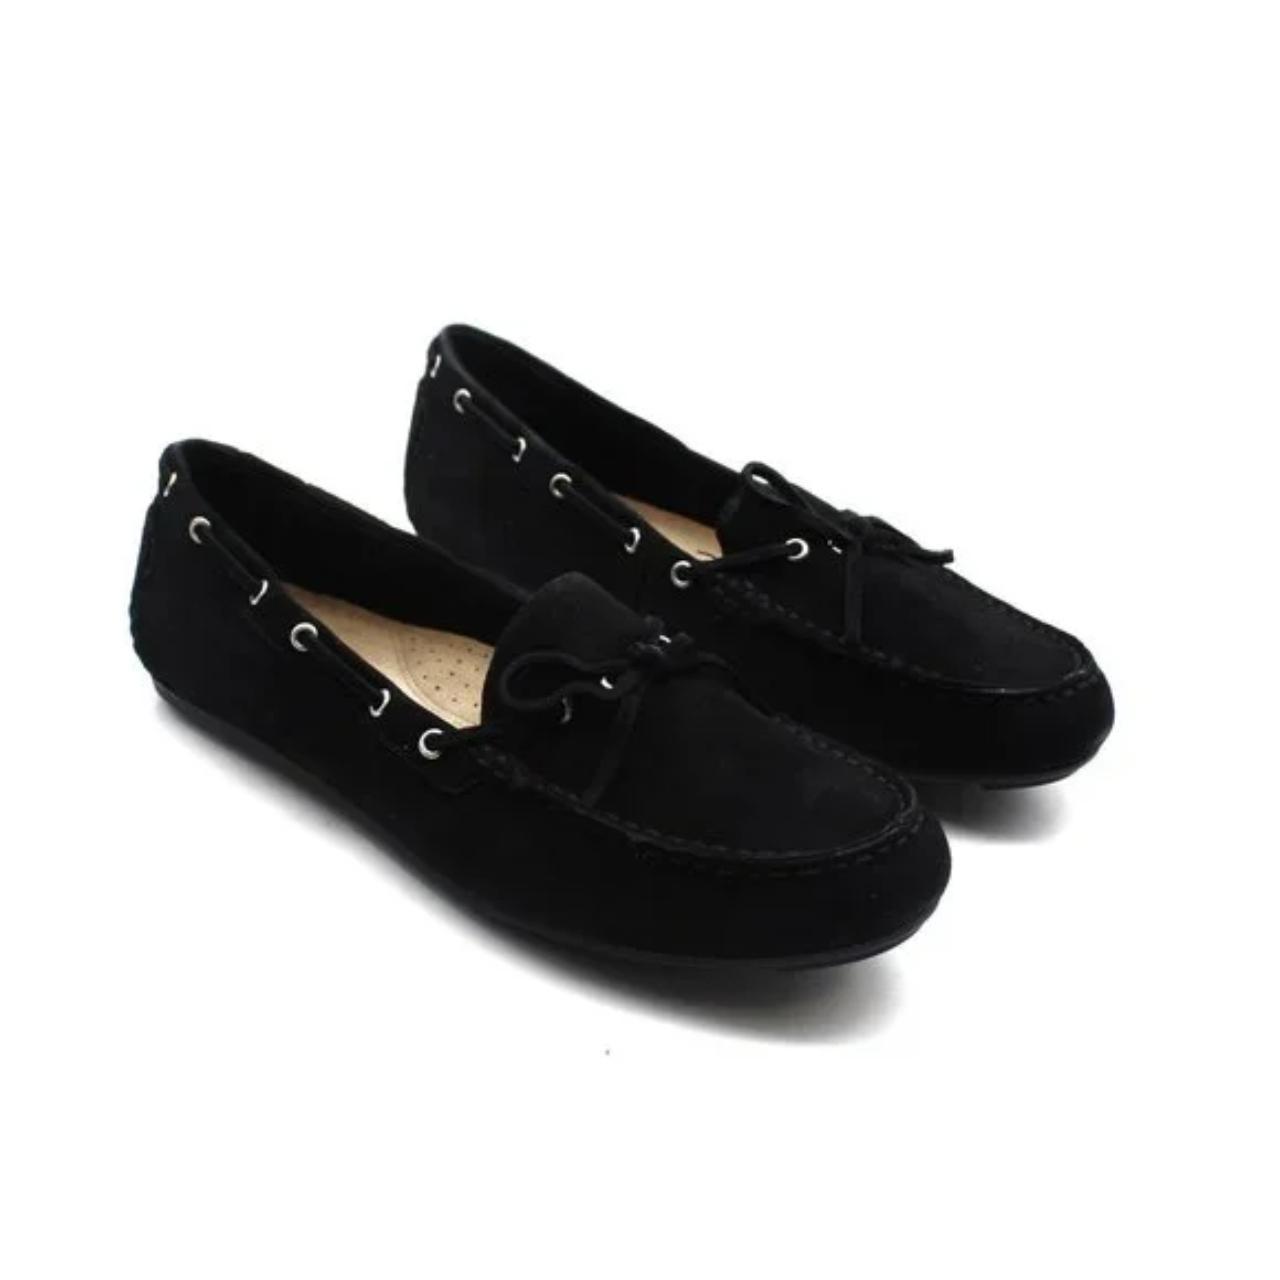 Bella Vita Scout Comfort Loafers Women's Shoes The... - Depop